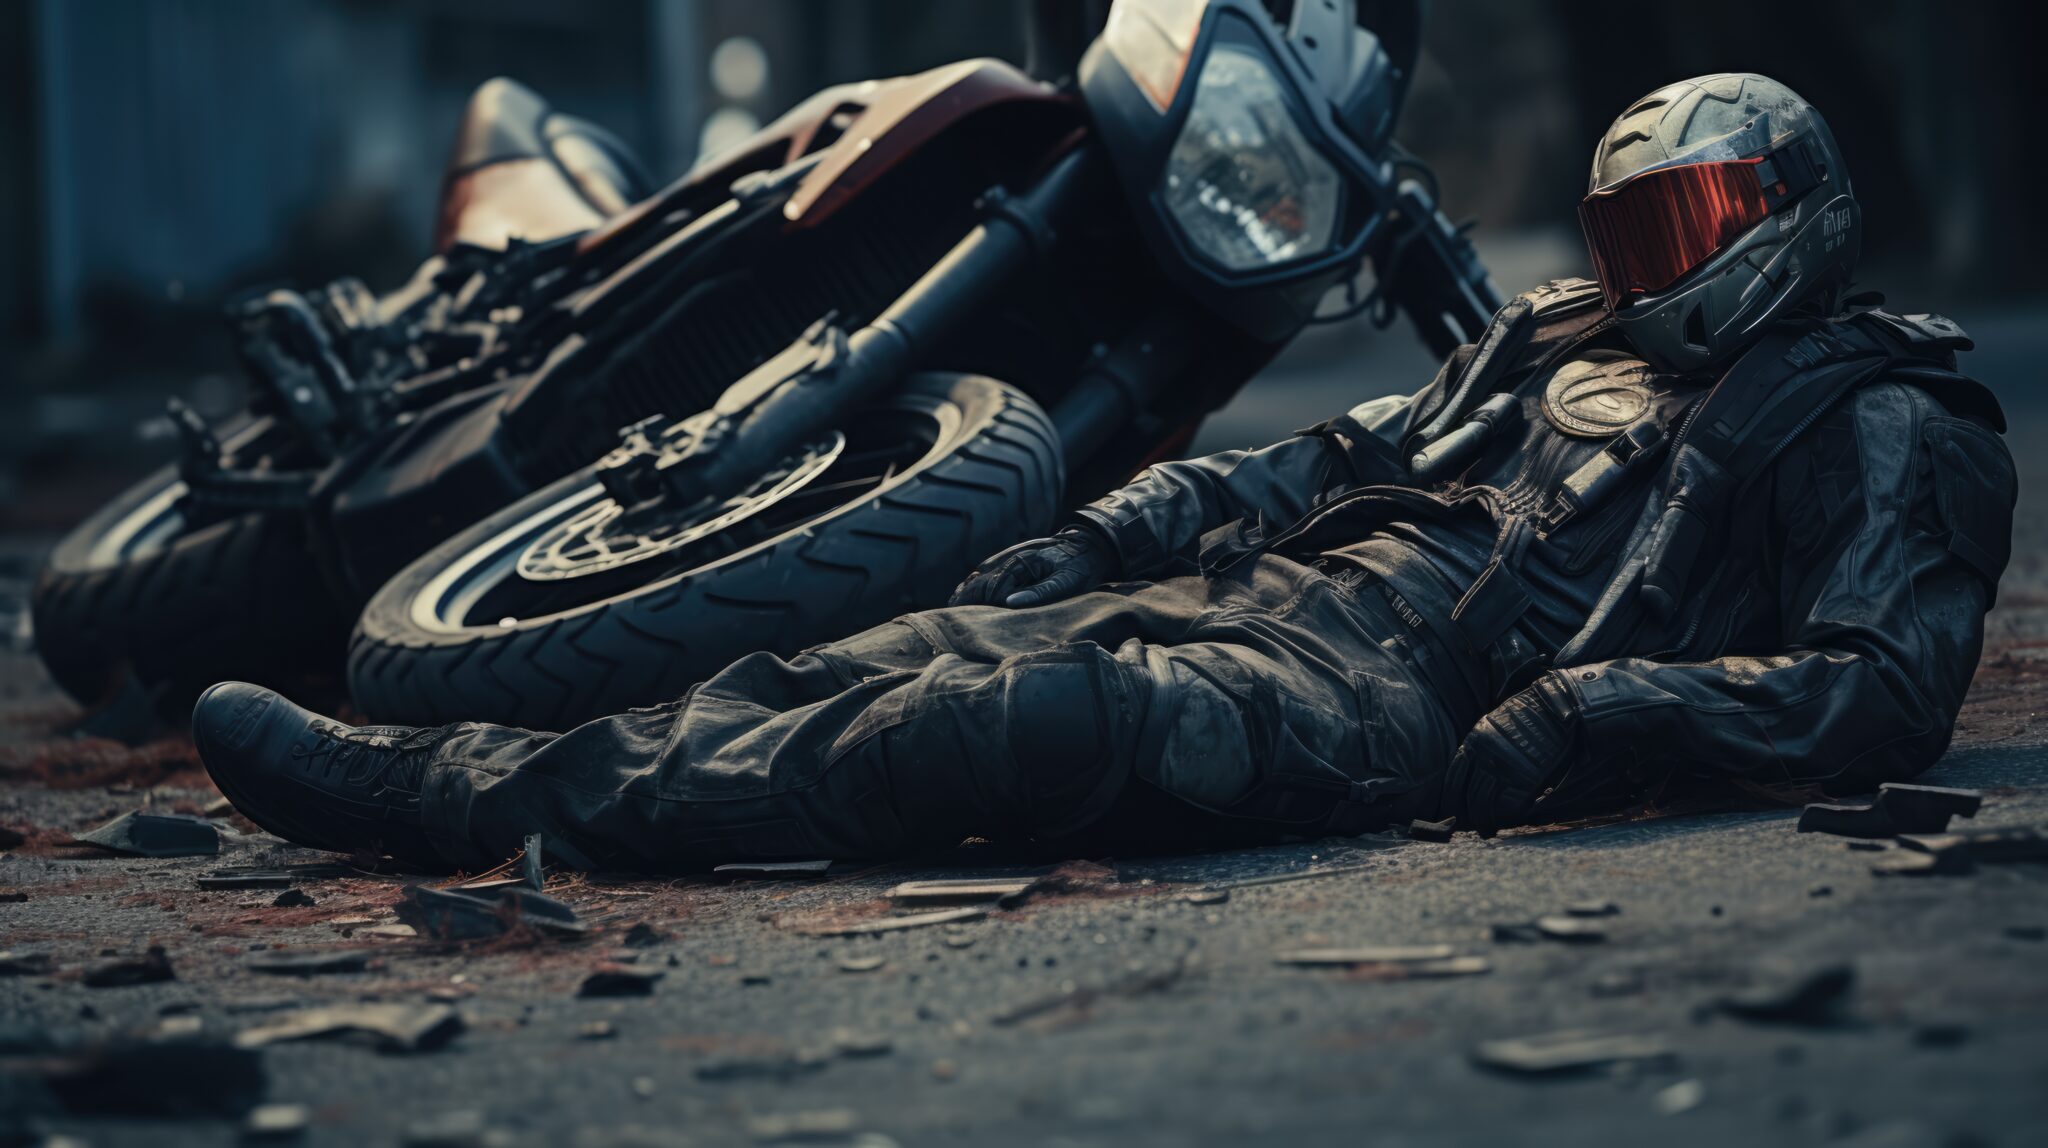 What Makes a Charlotte NC Motorcycle Accident Attorney the Right Choice After an Accident?